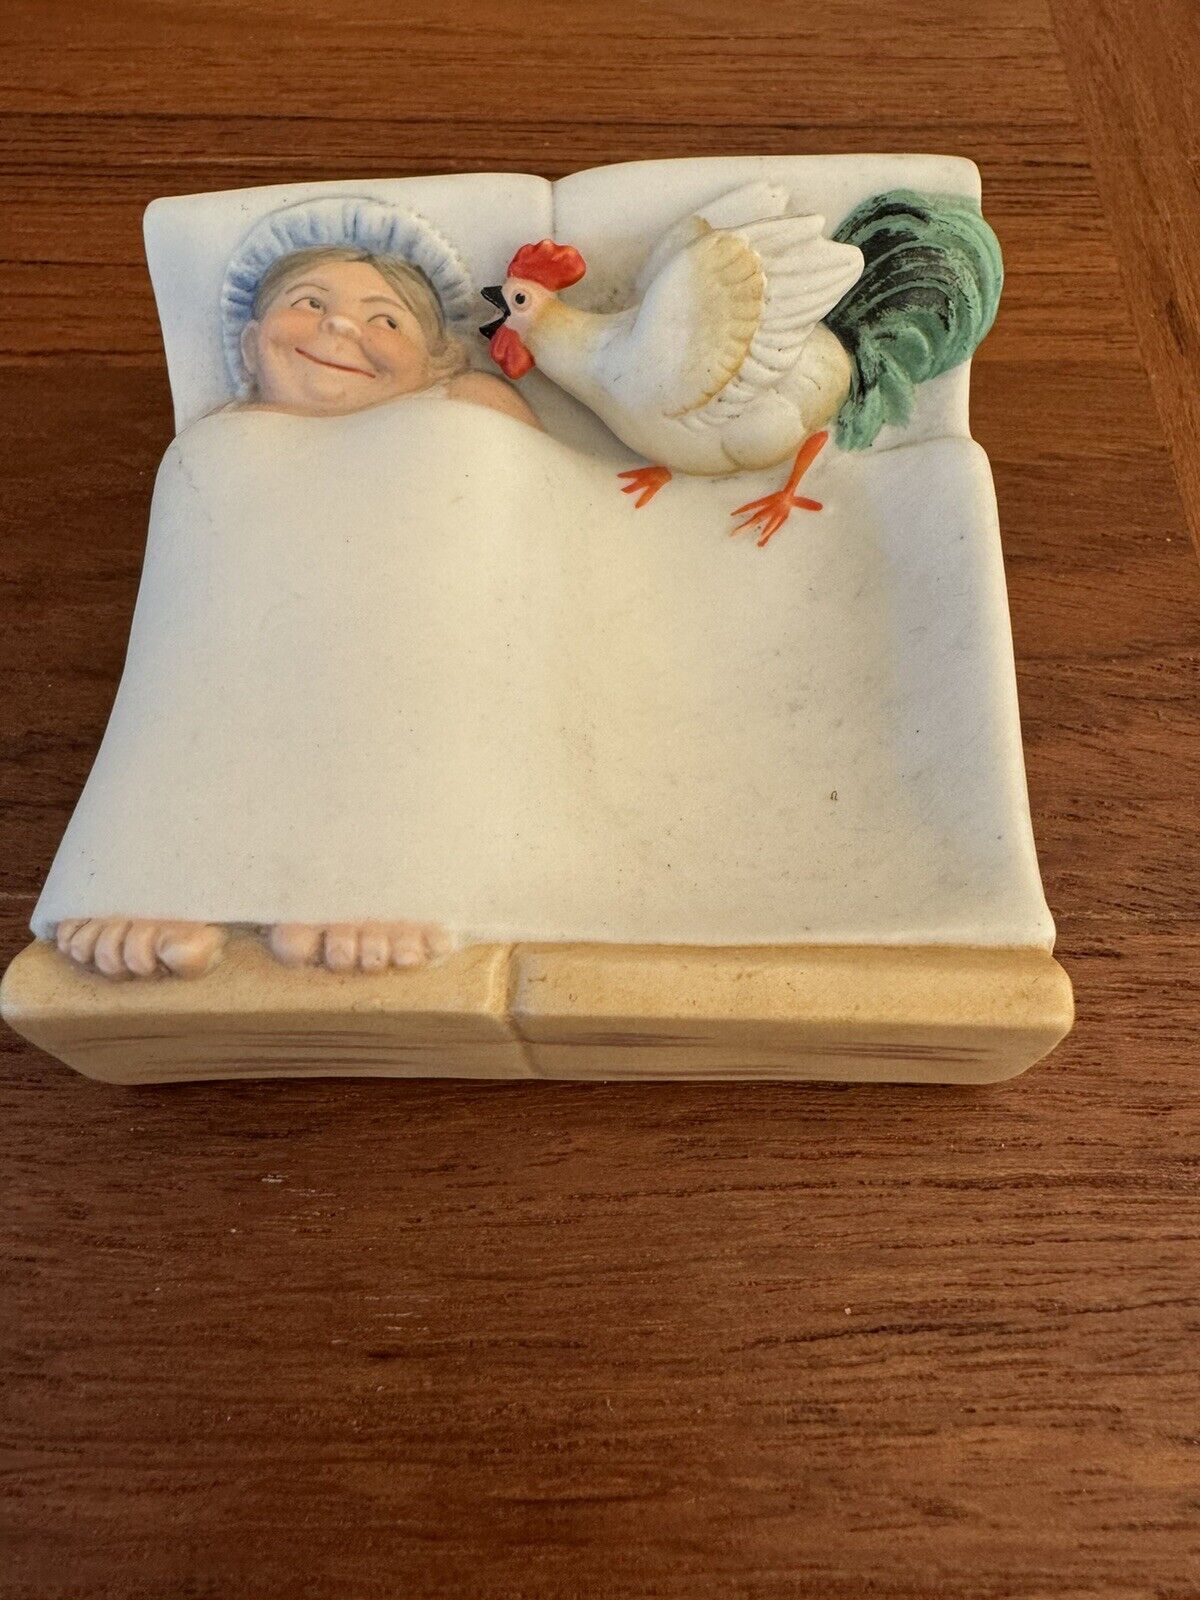 Rare Antique Porcelain Knickknack. Approximately 3x3” Inches At Base.